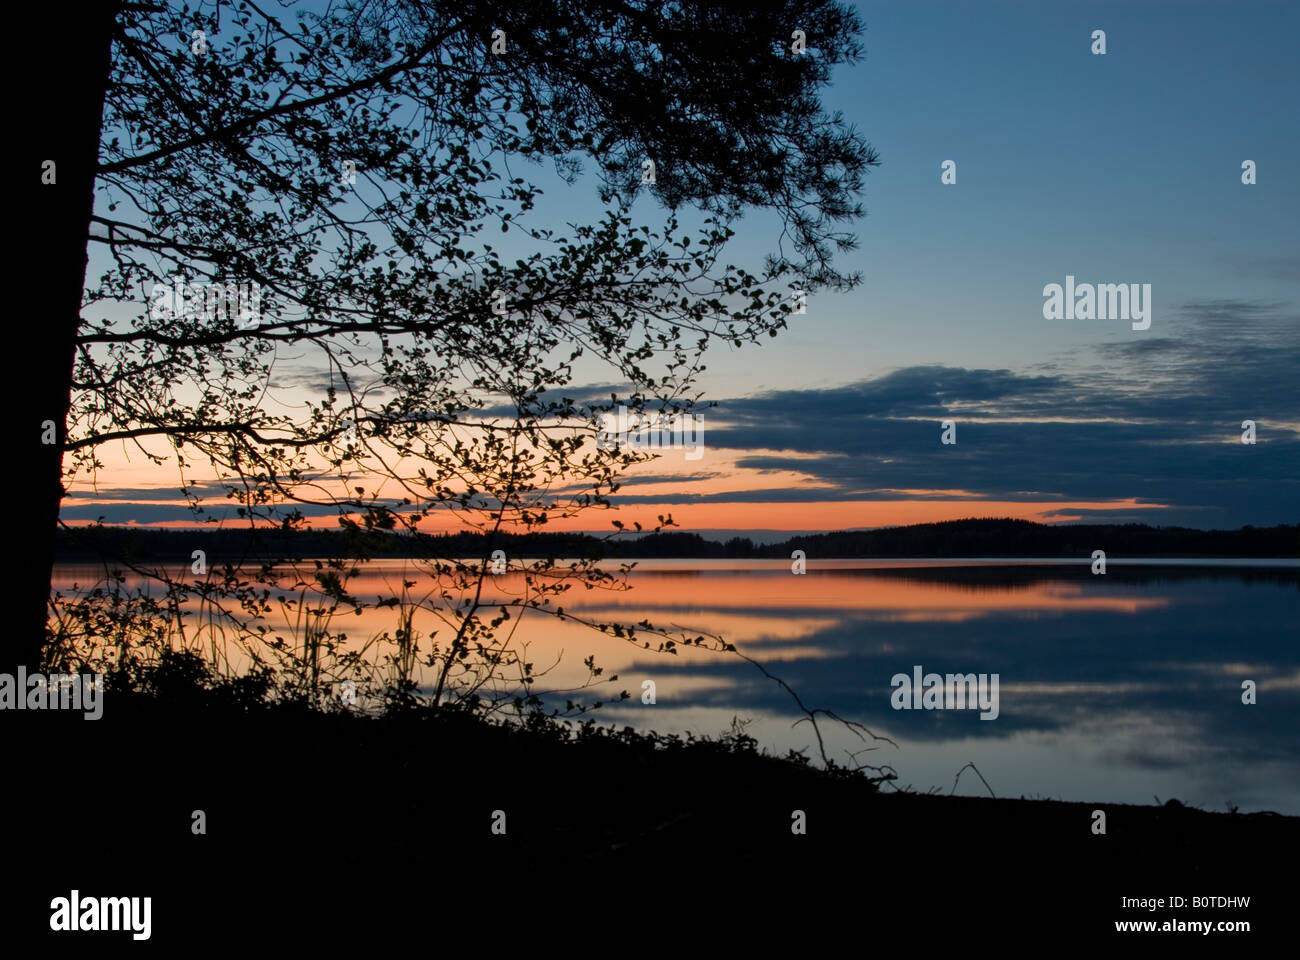 Lake surface mirroring the colourful sky after sunset Stock Photo